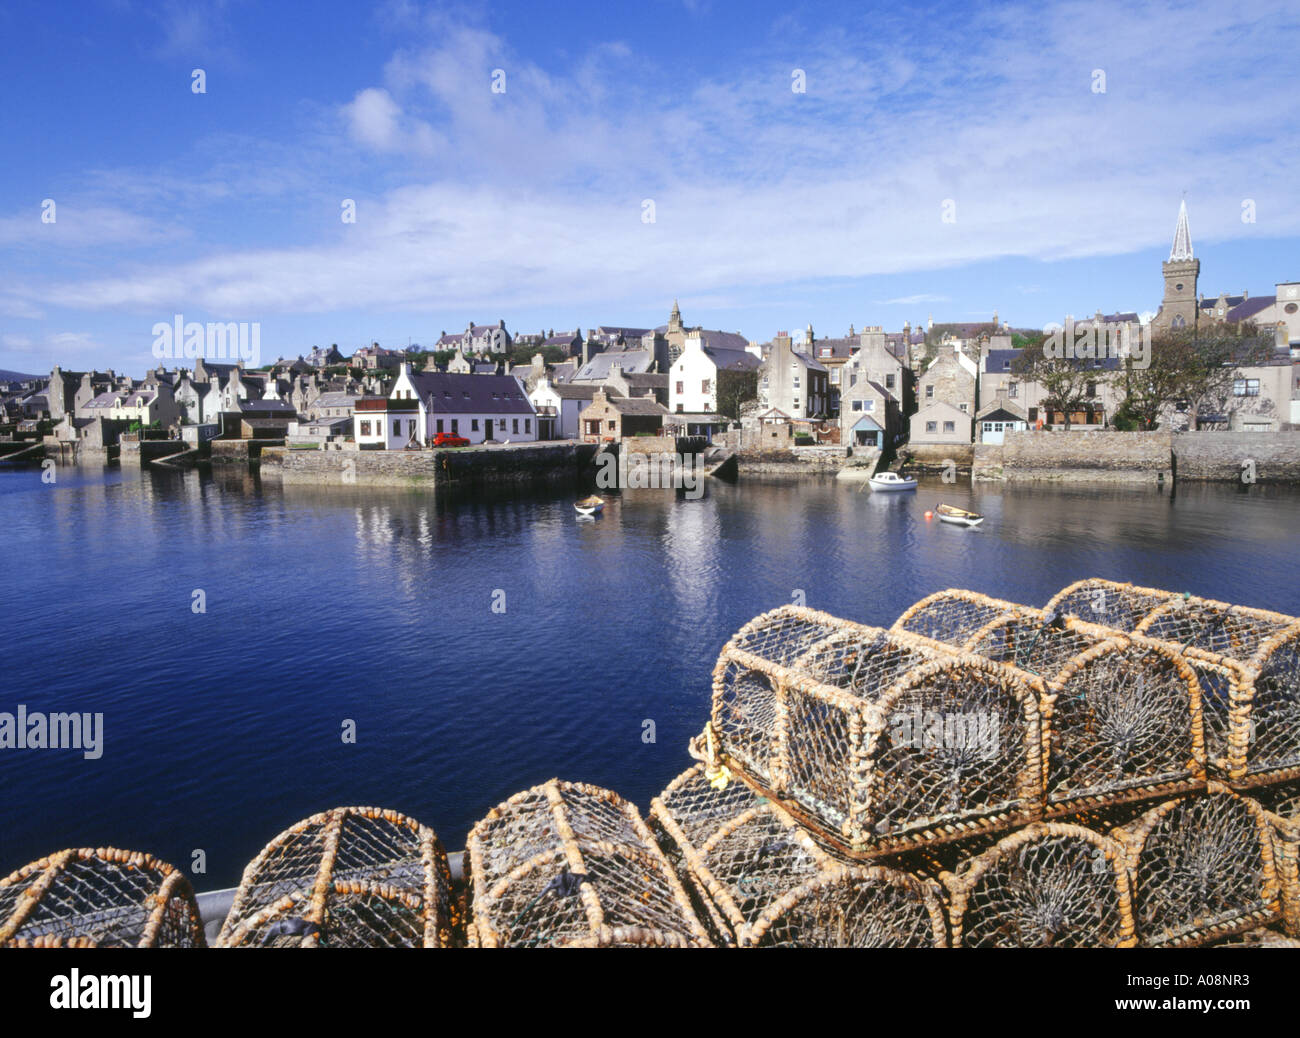 dh Scottish harbor waterfront STROMNESS HARBOUR ORKNEY Lobster creels scene quayside houses town fishing pots fish cages Scotland fishery Stock Photo